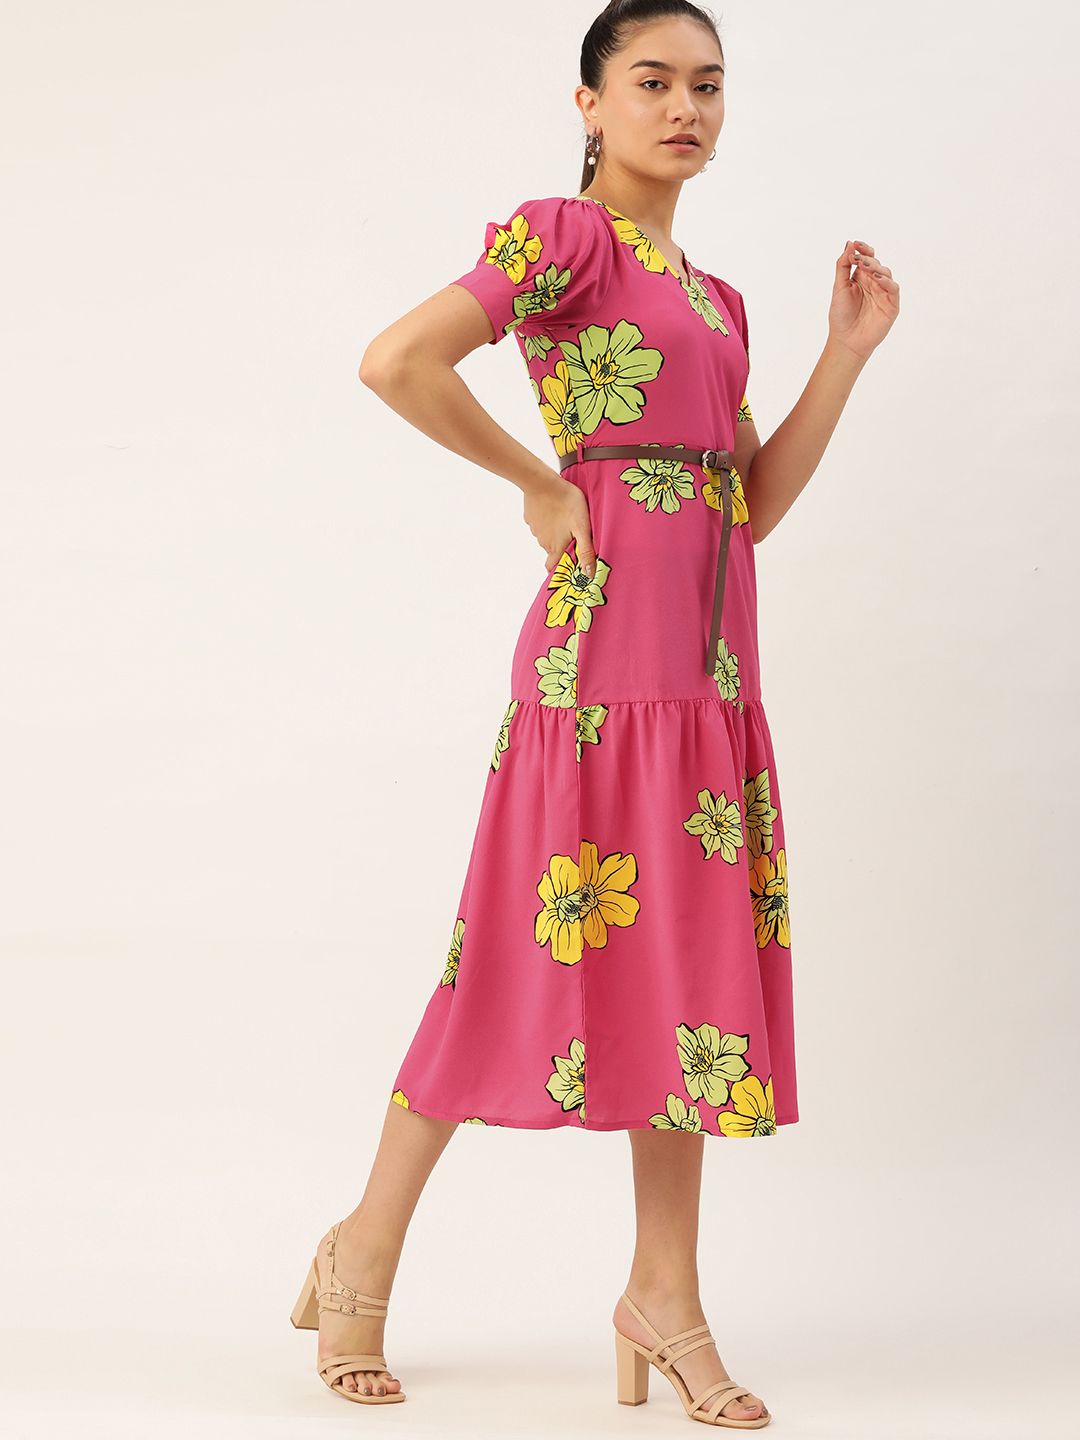 DressBerry Pink & Yellow Floral Printed A-Line Midi Dress With A Belt Price in India